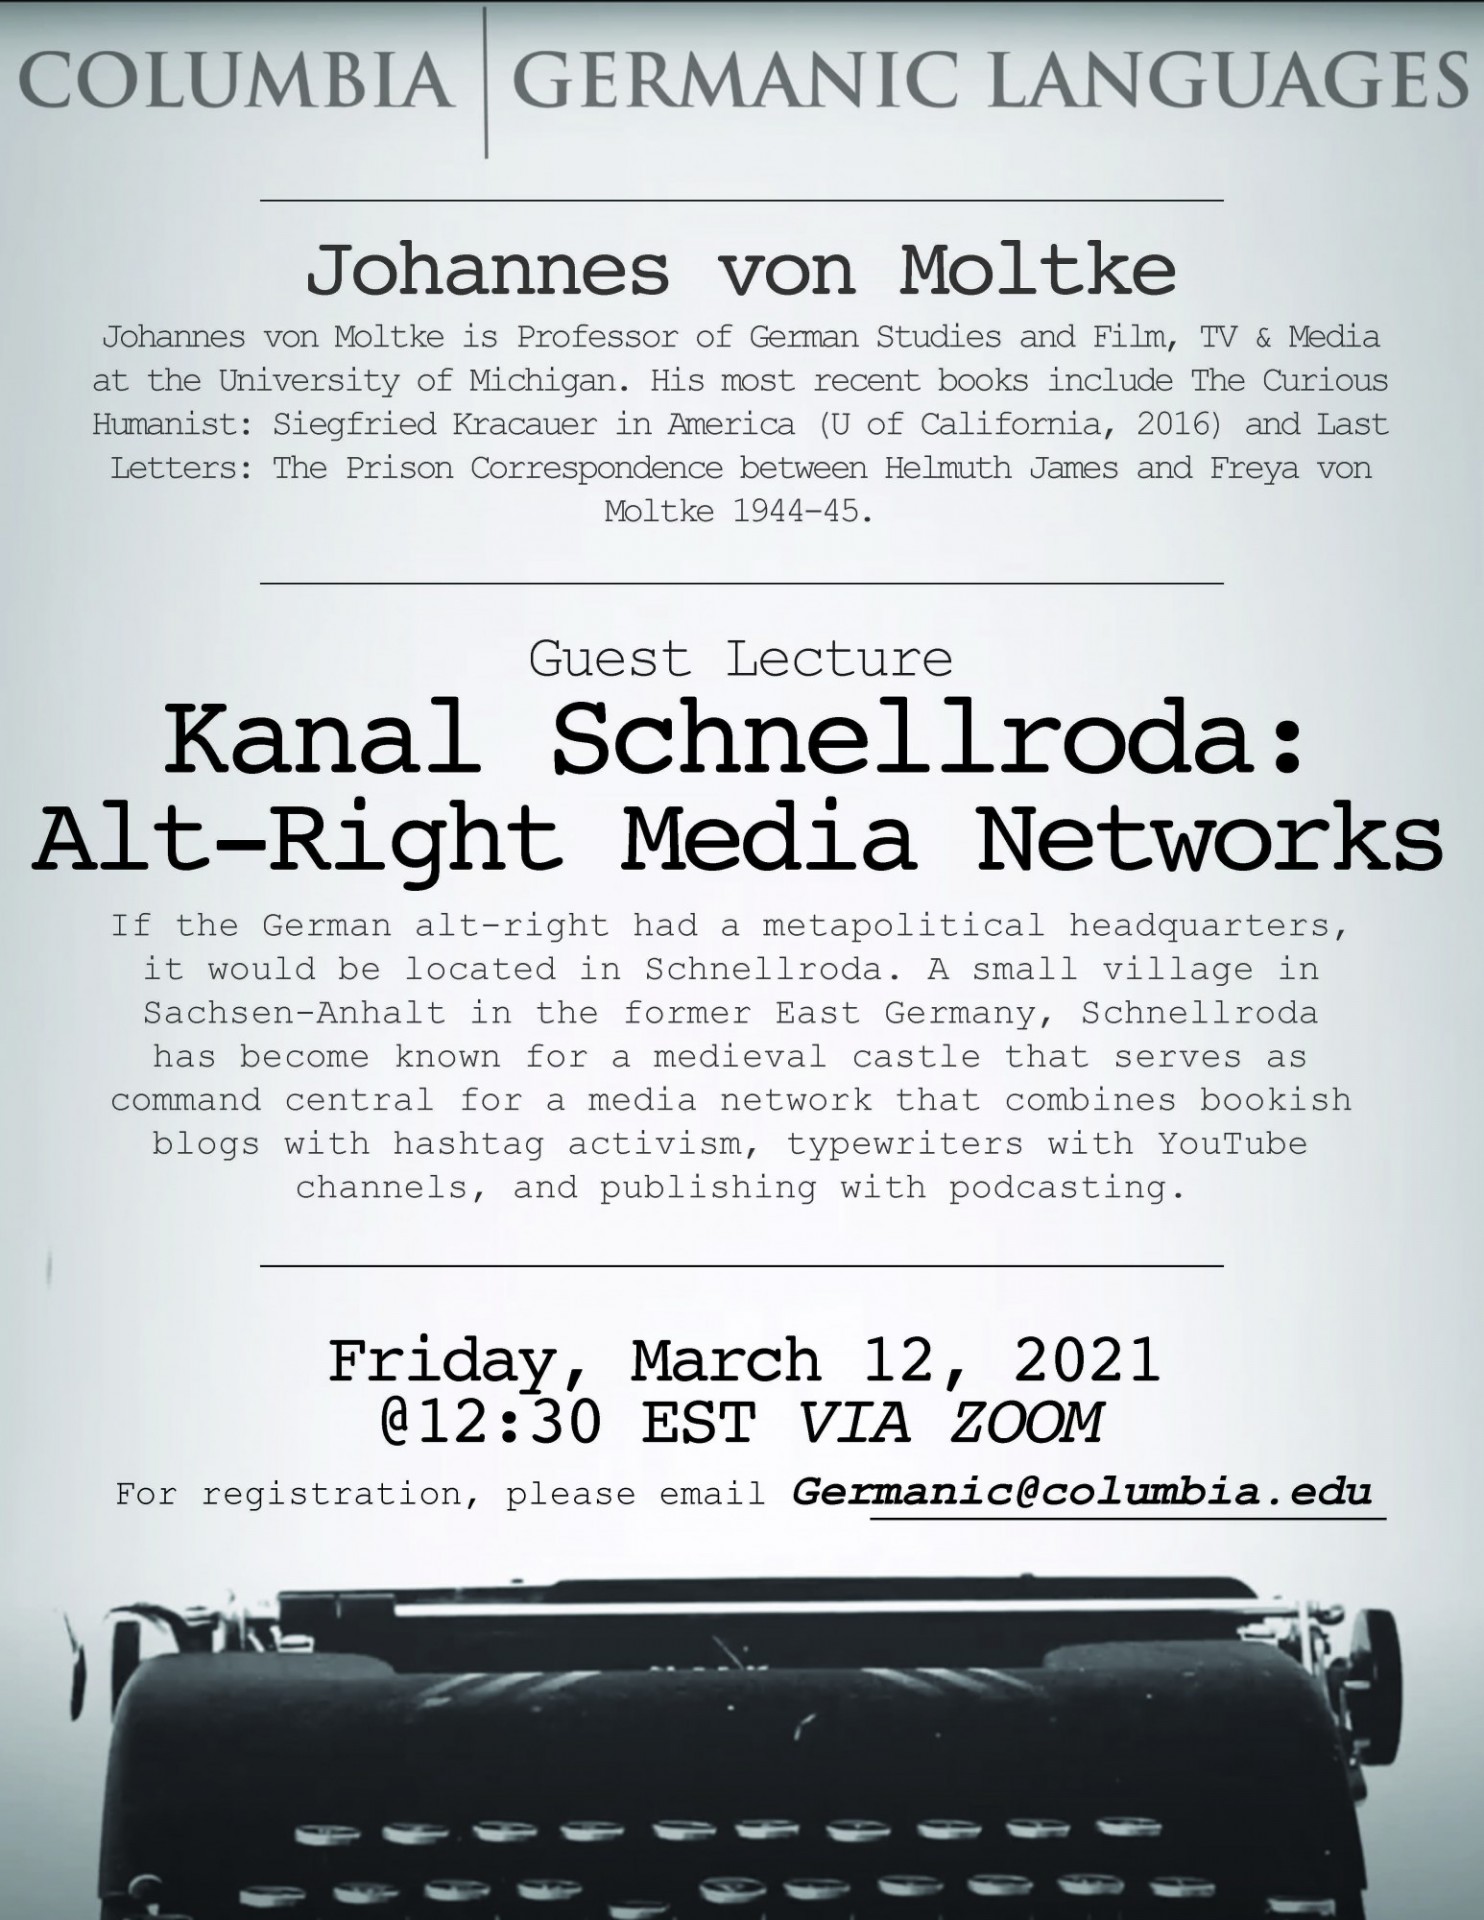 Guest Lecture: Johannes von Moltke, "Kanal Schnellroda: Alt-Right Media Networks"

For registration, please email germanic@columbia.edu.  Paper will be pre-circulated as a pdf-file to registered participants one week in advance.